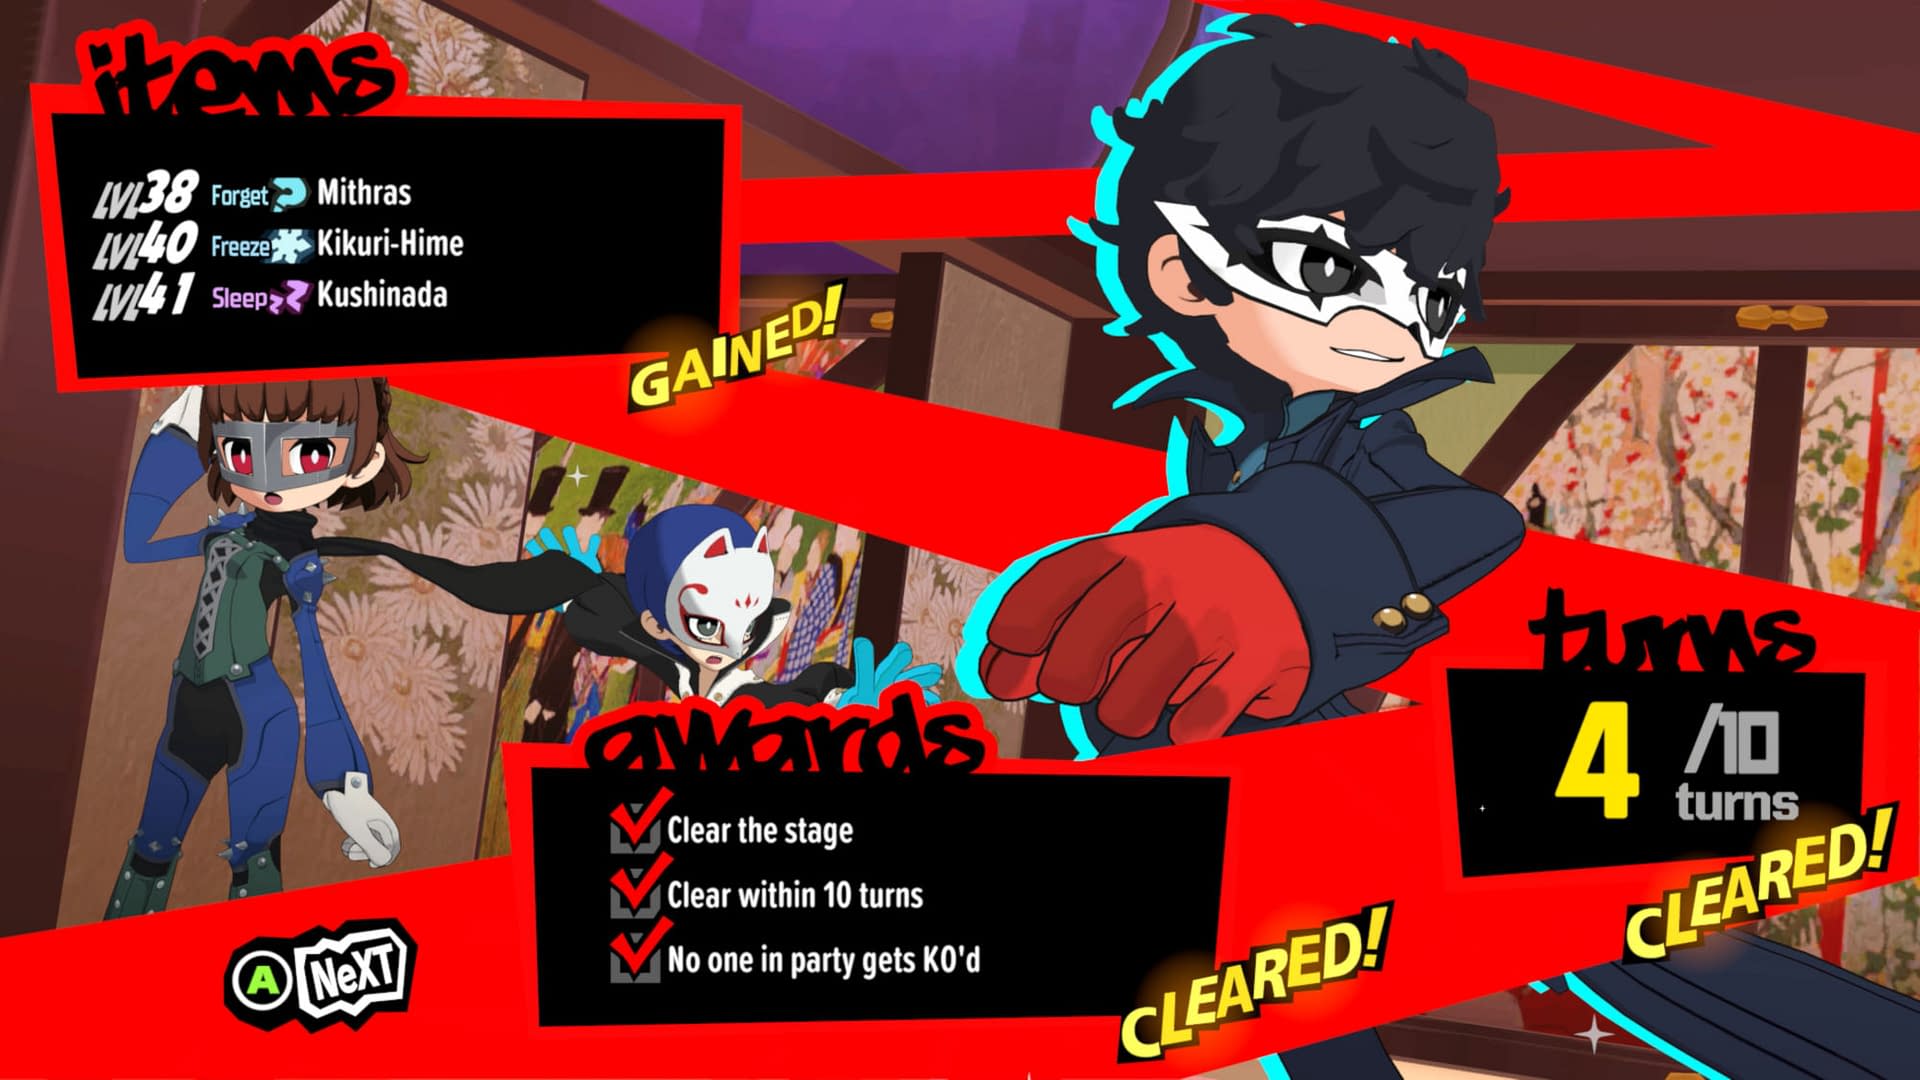 Persona 5 Tactica Officially Revealed, New Details, Screenshots